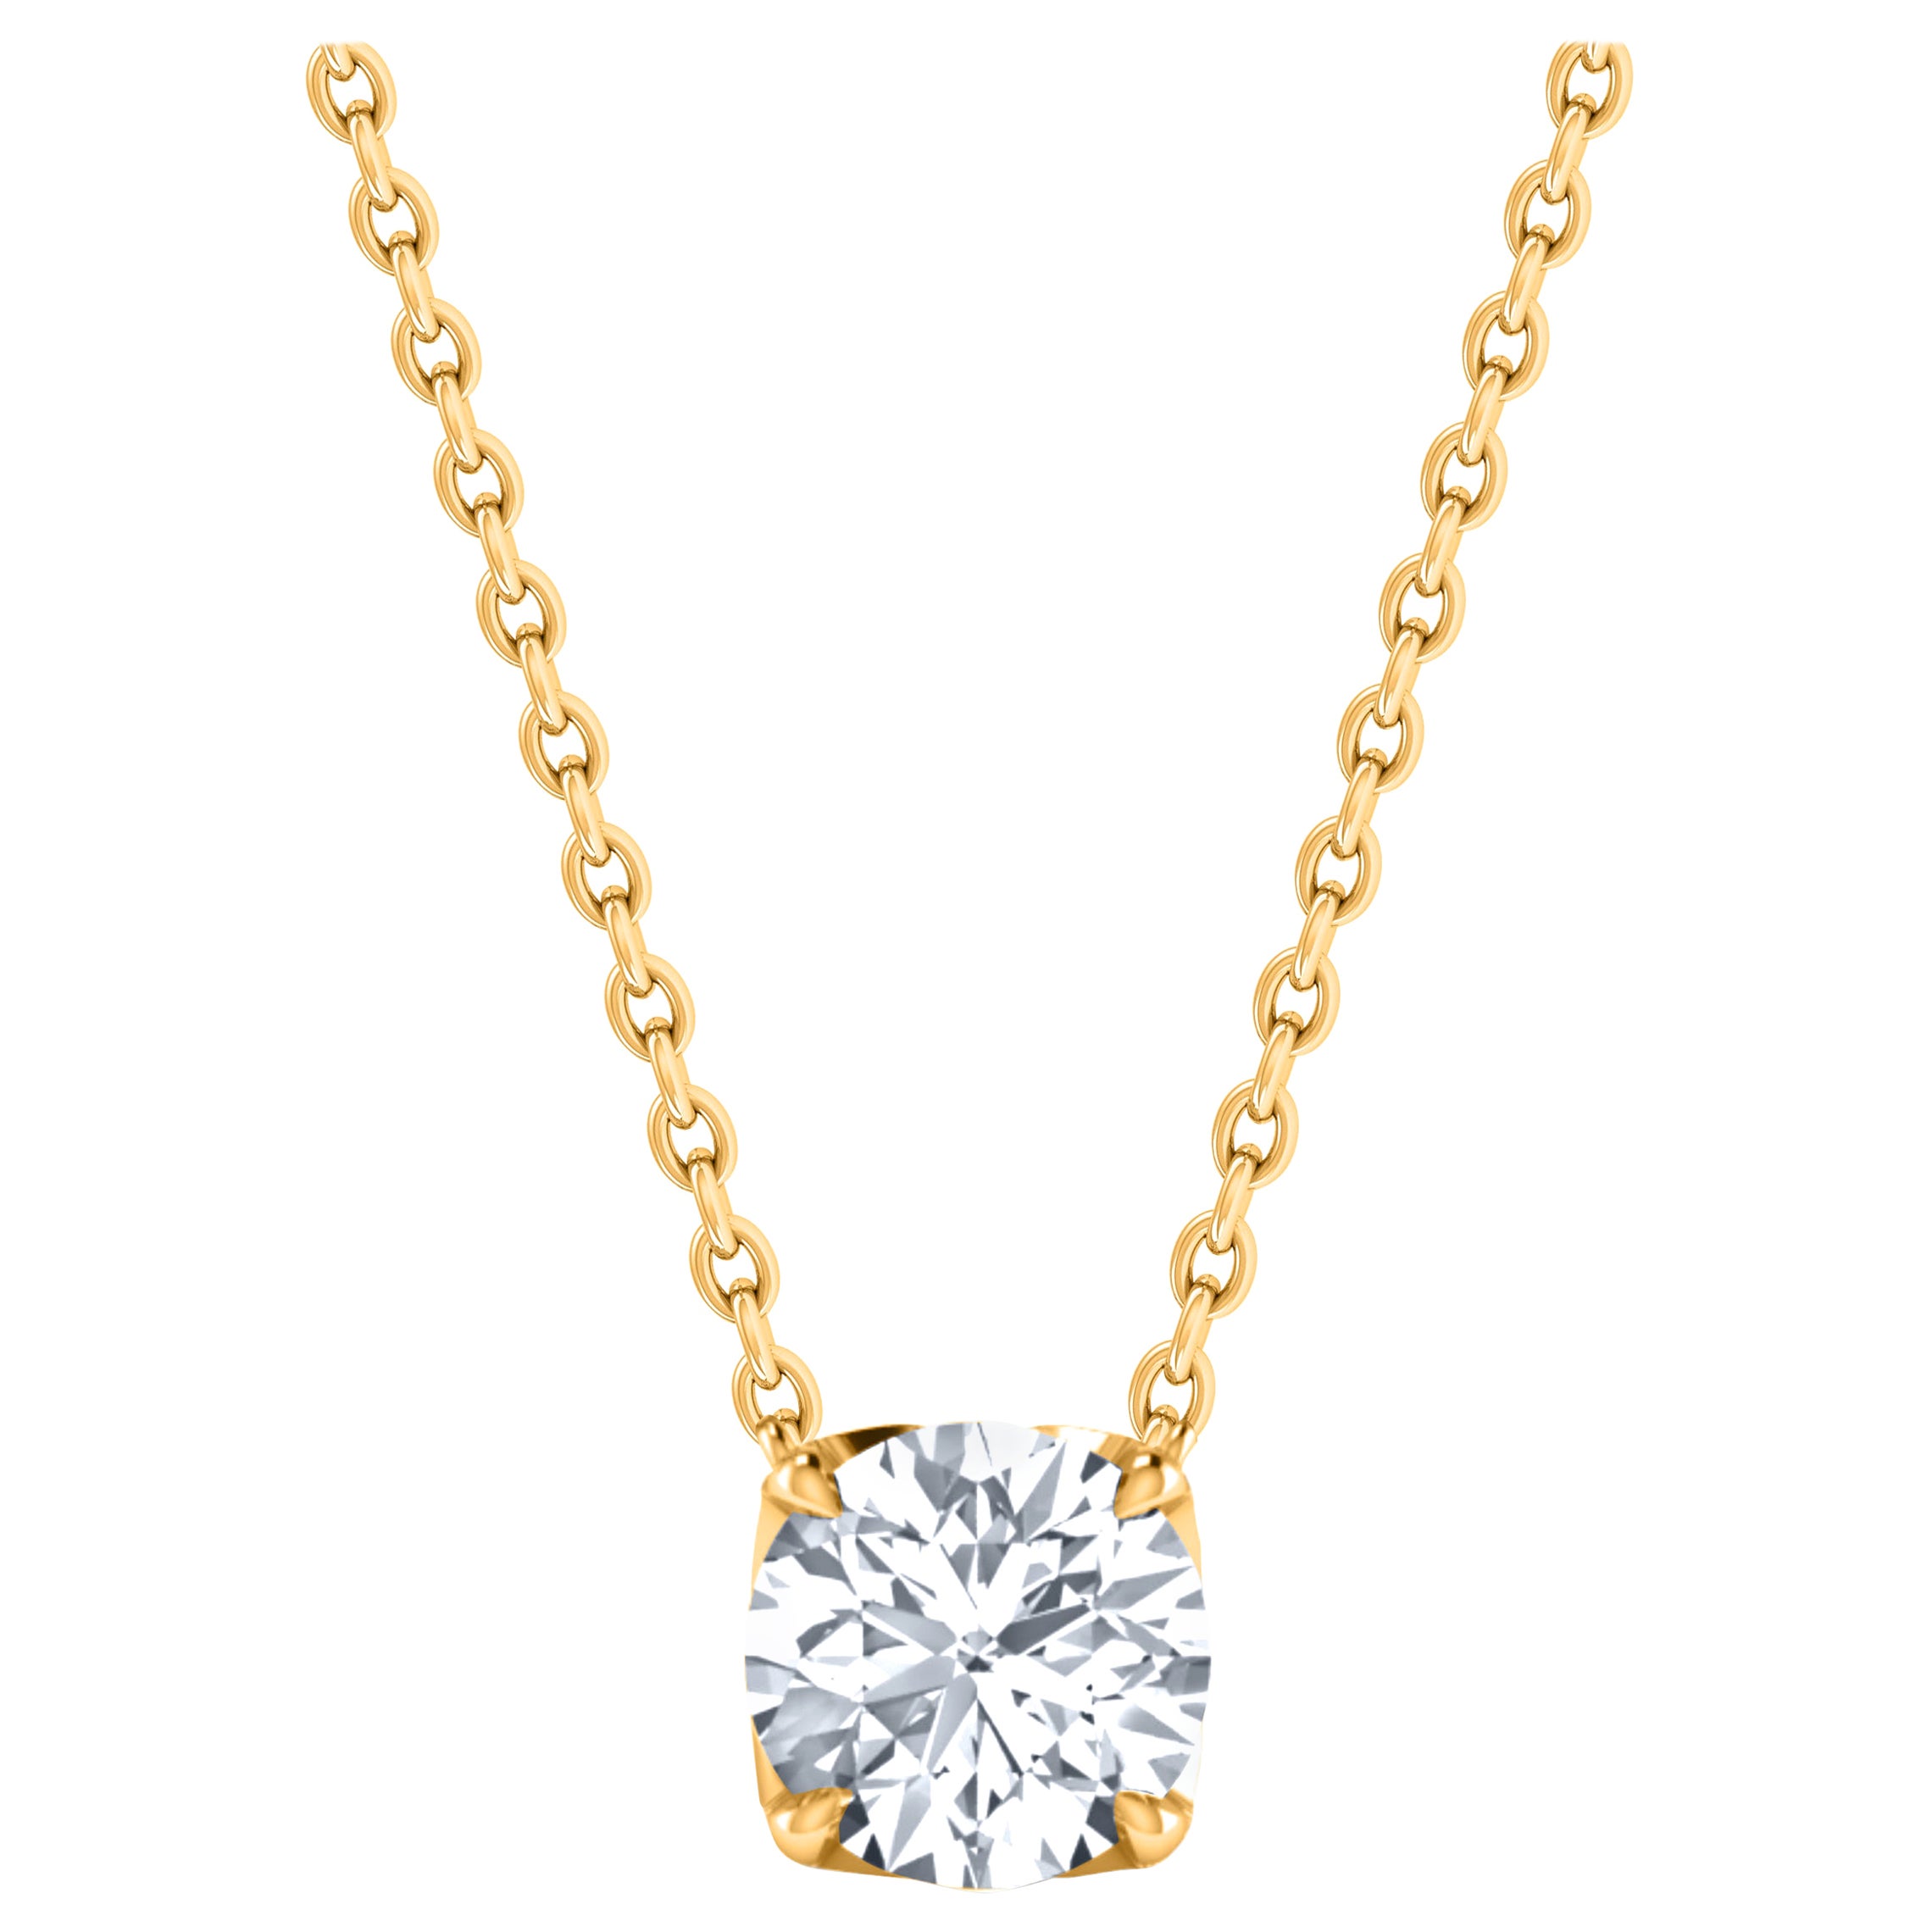 Harakh GIA Certified 0.33 Carat Solitaire Diamond Pendant Necklace in 18 Kt Gold